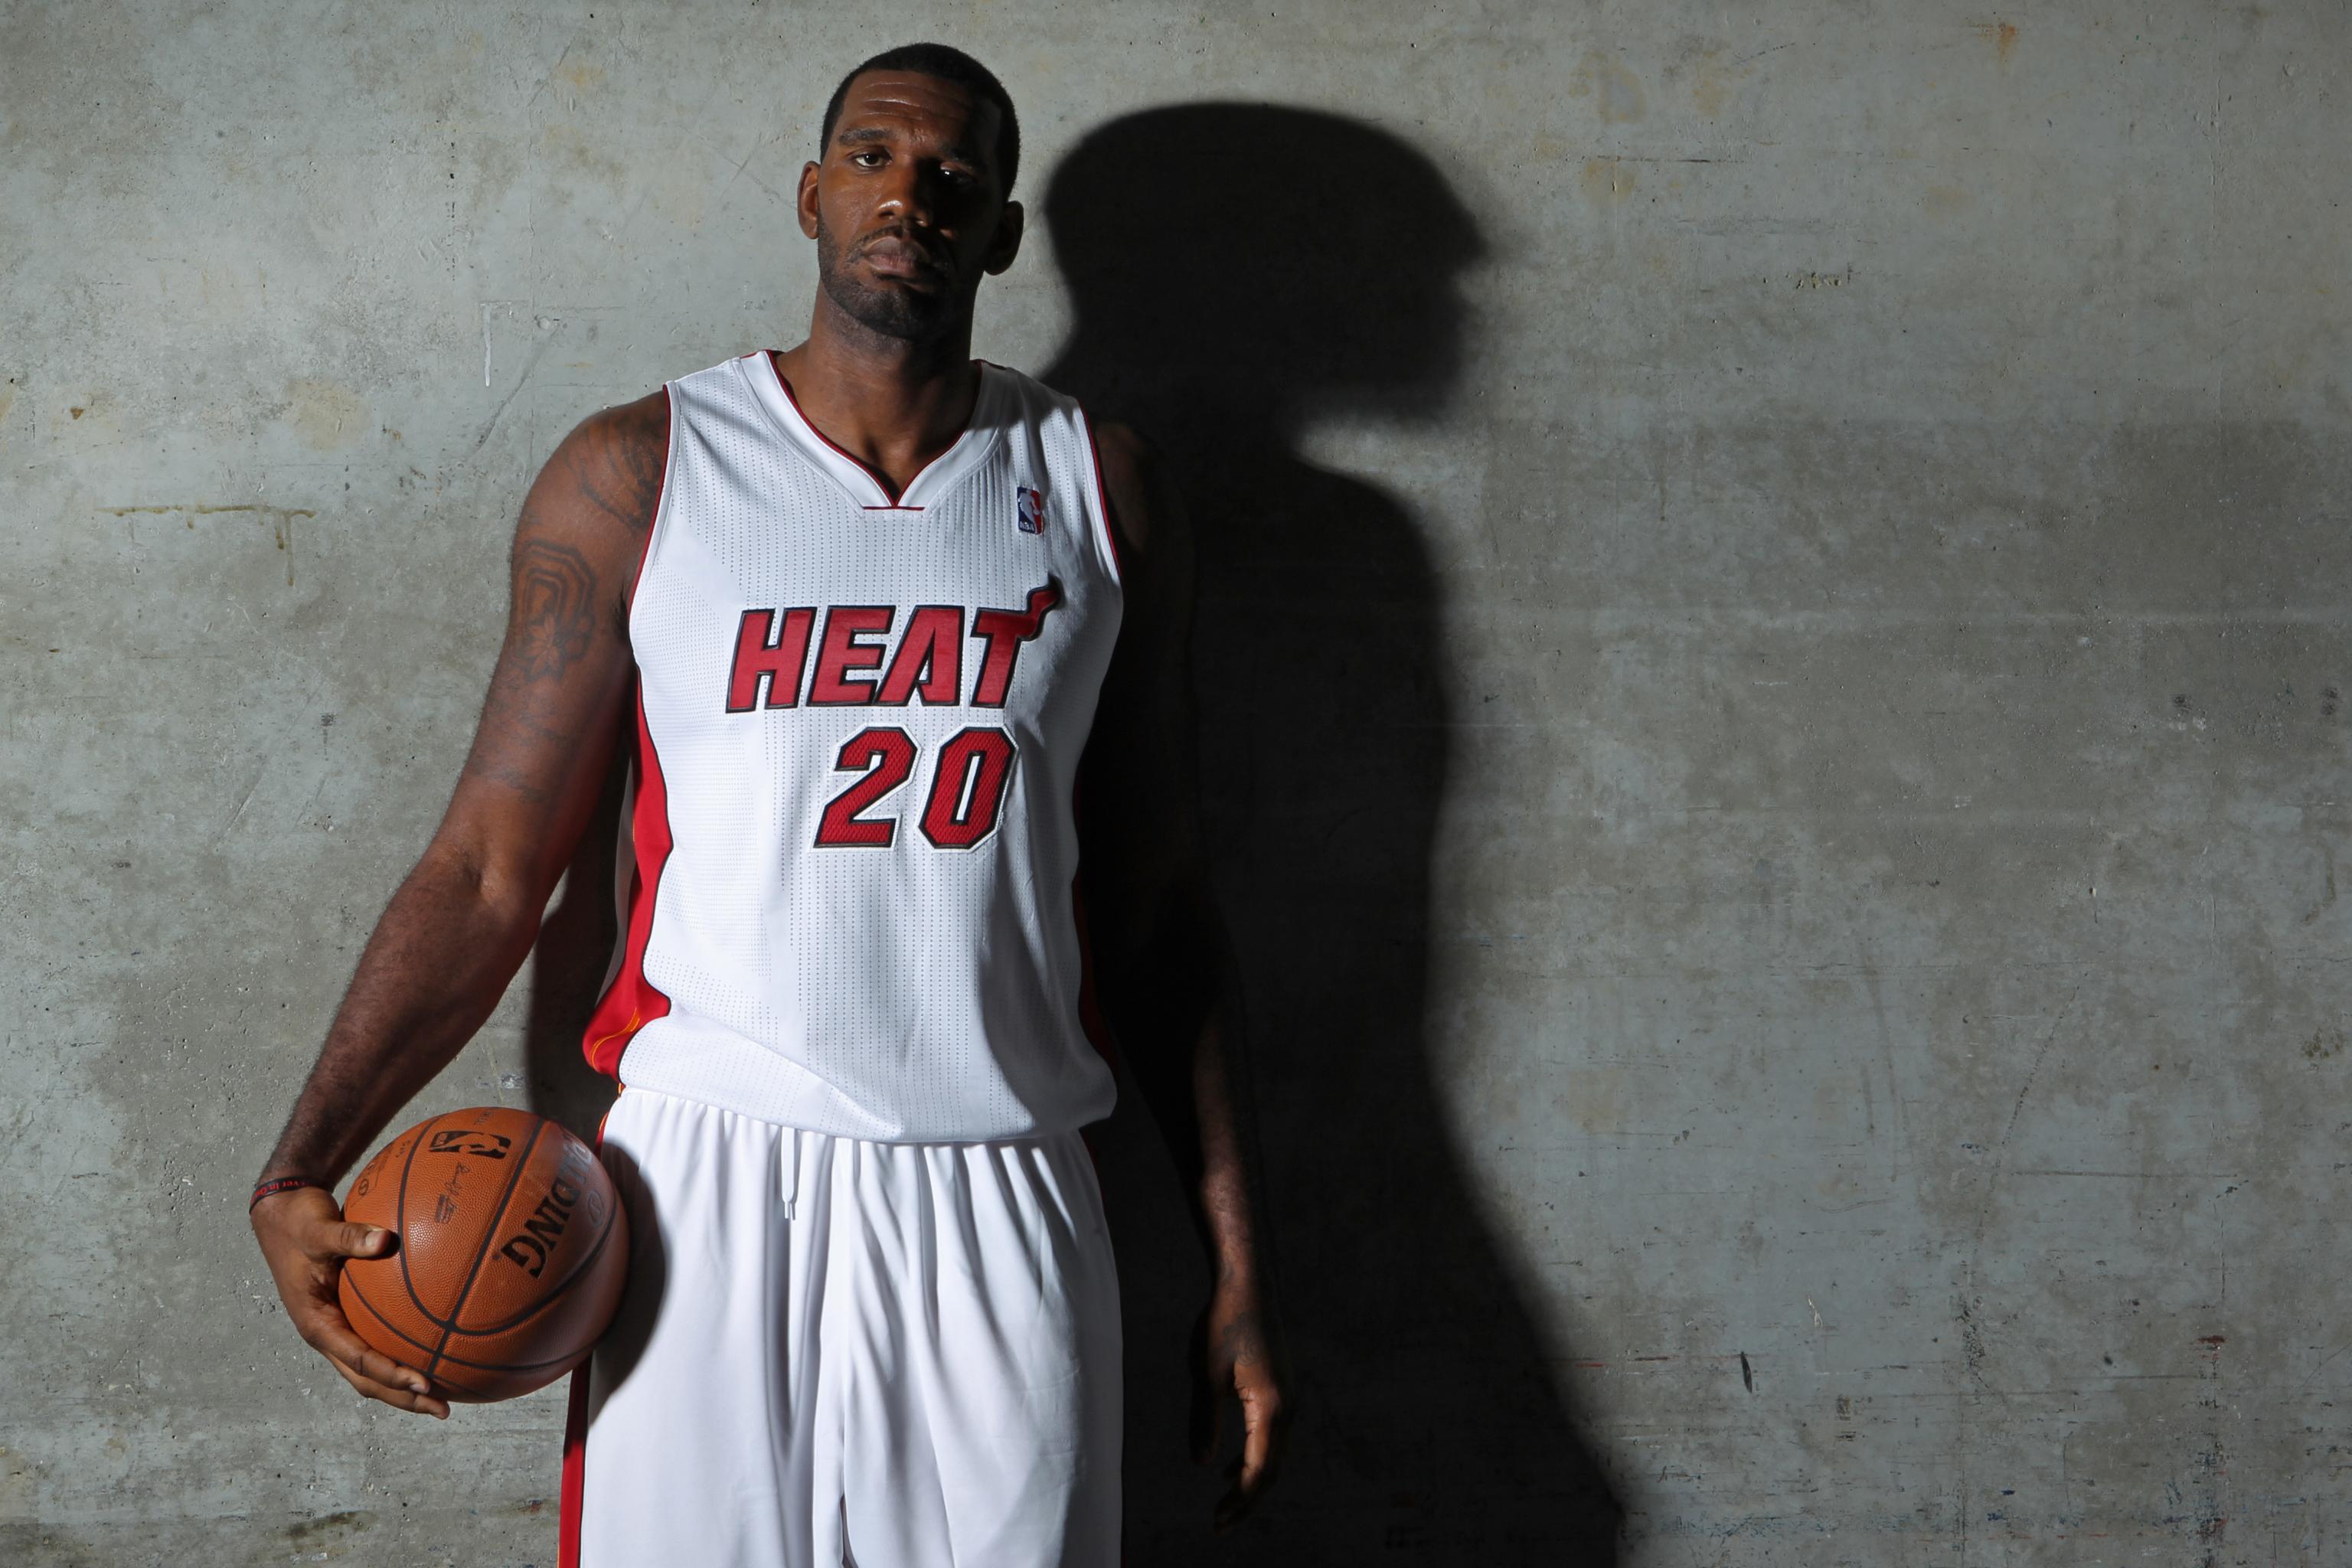 Greg Oden of Miami Heat likely to be cleared for full practice, sources say  - ESPN